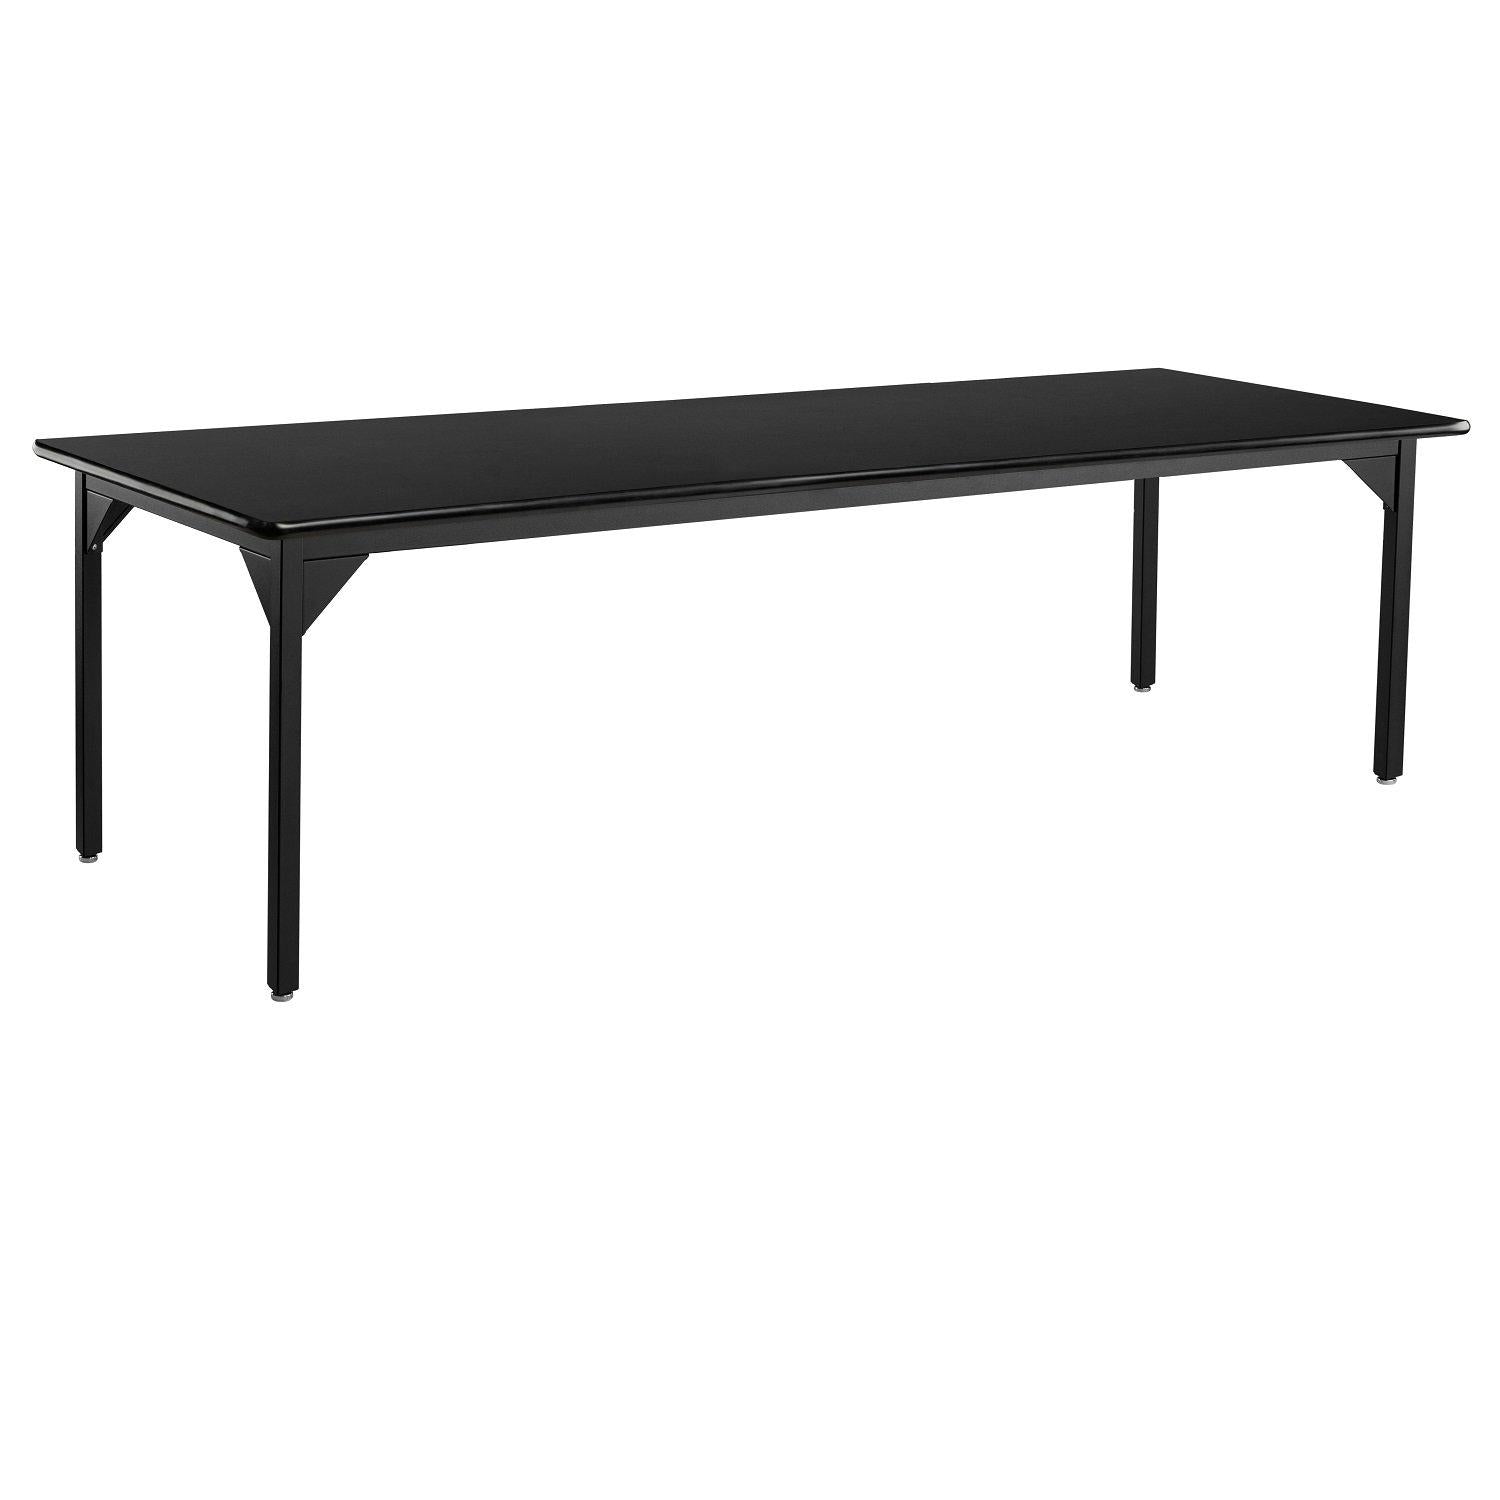 Heavy-Duty Fixed Height Utility Table, Black Frame, 42" x 72", High-Pressure Laminate Top with T-Mold Edge